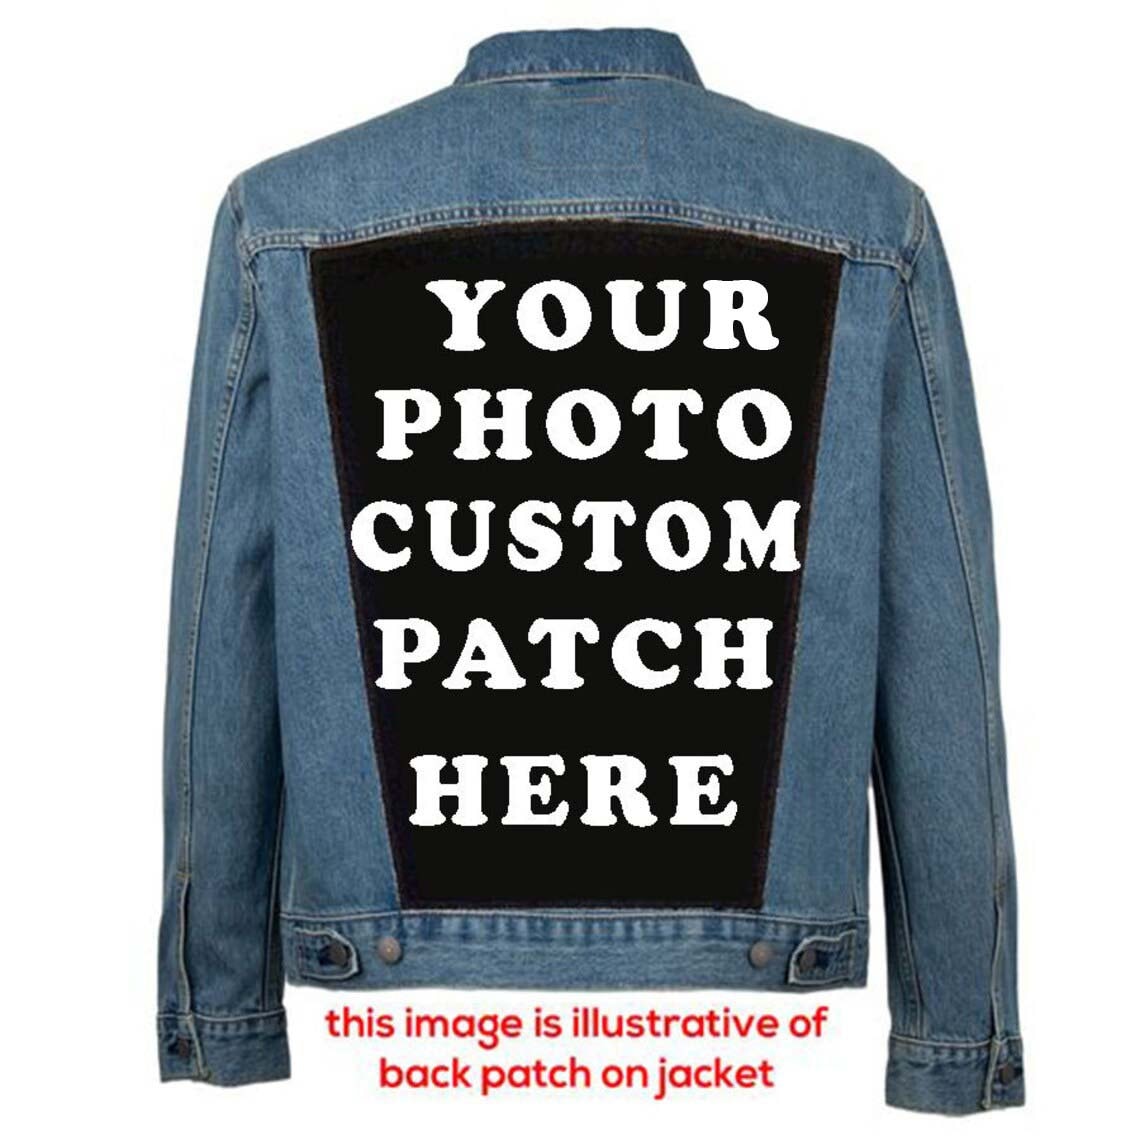 Custom Patches For Jackets, No Minimum, 30% OFF